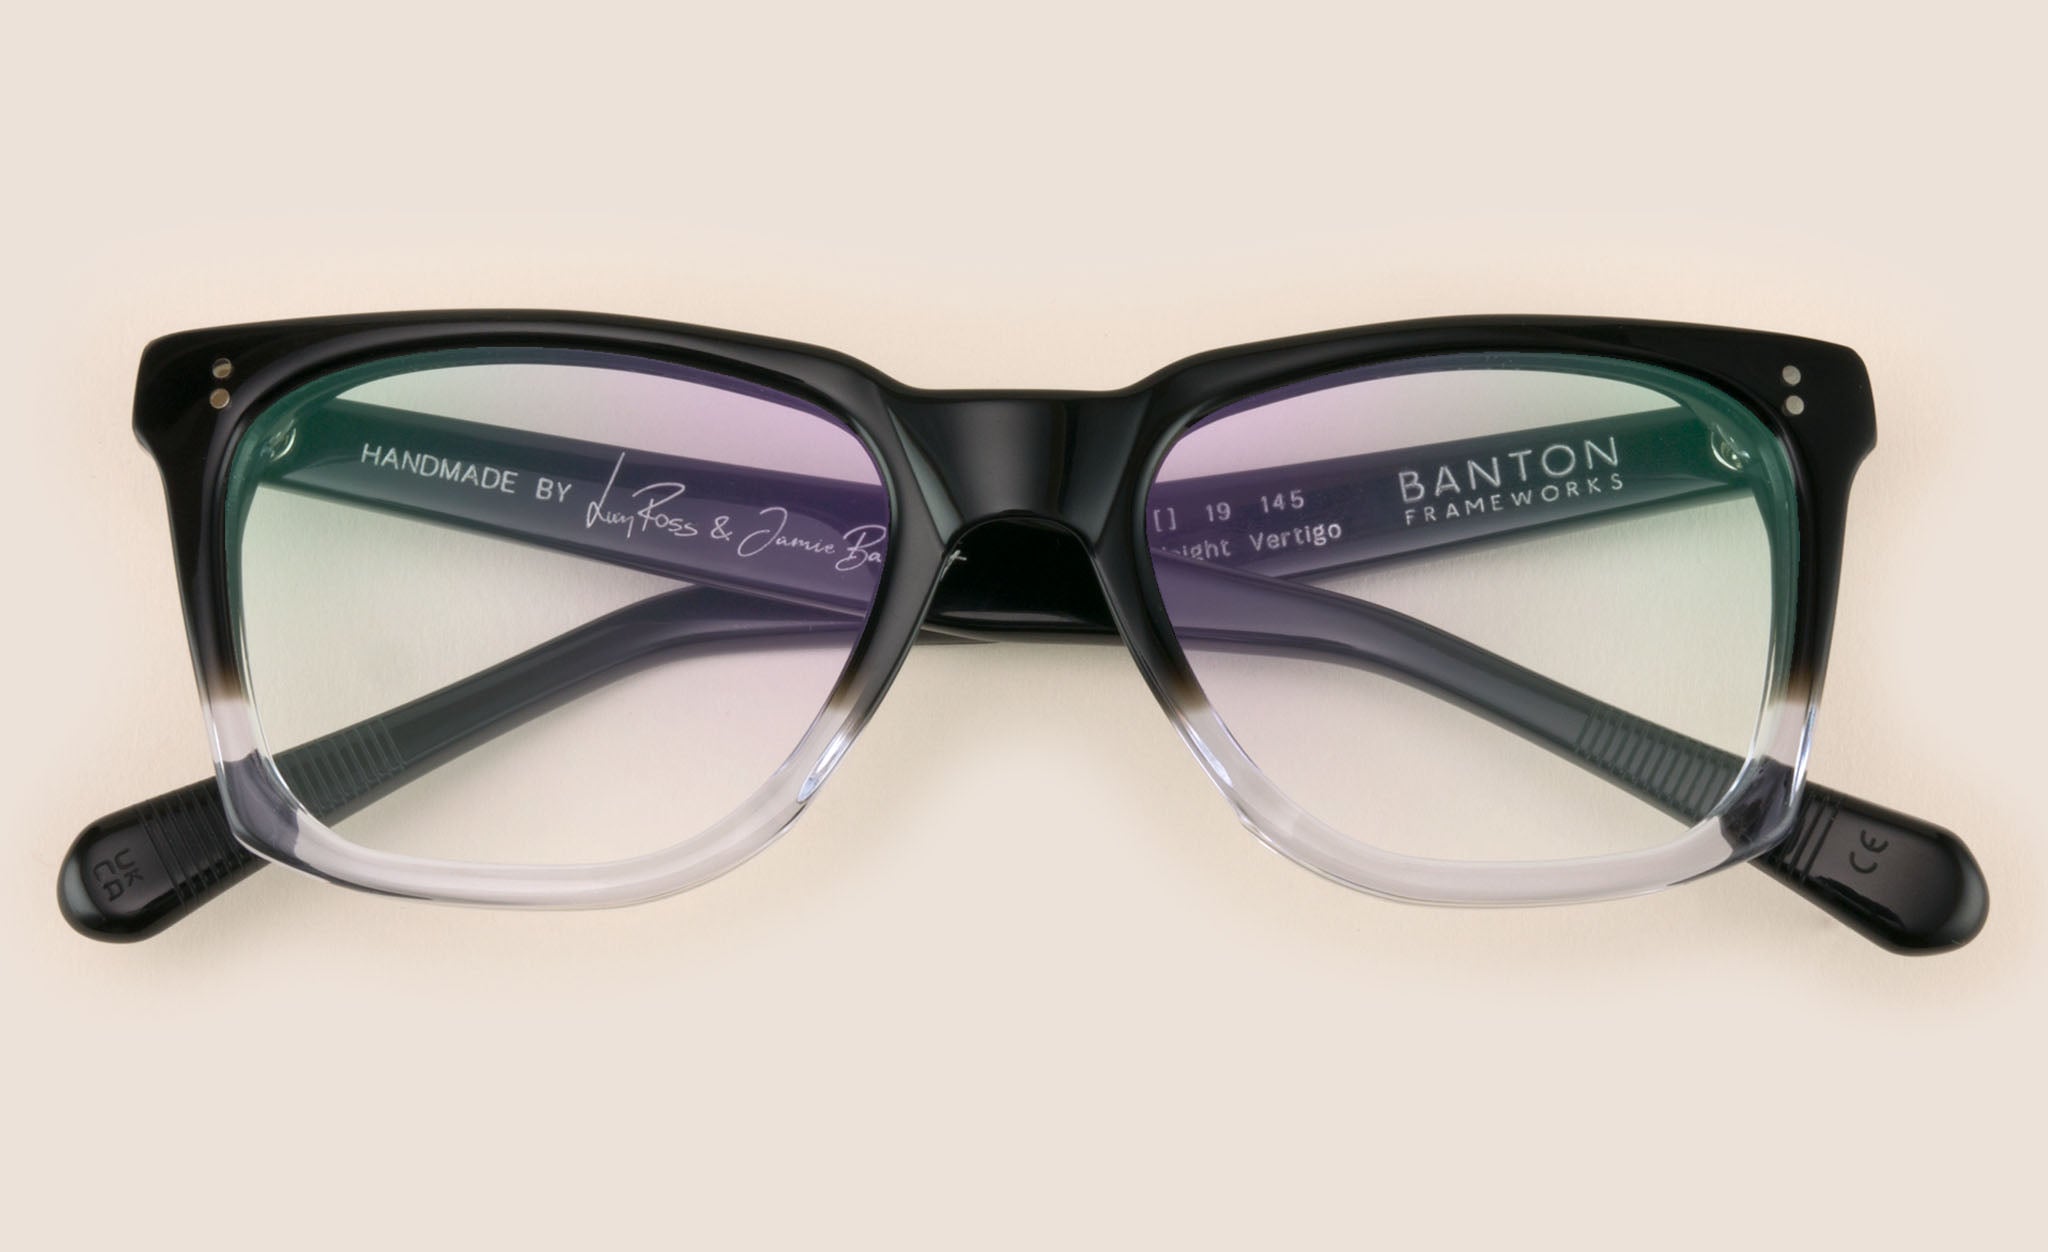 Rectangular gradient two-tone spectacle frame